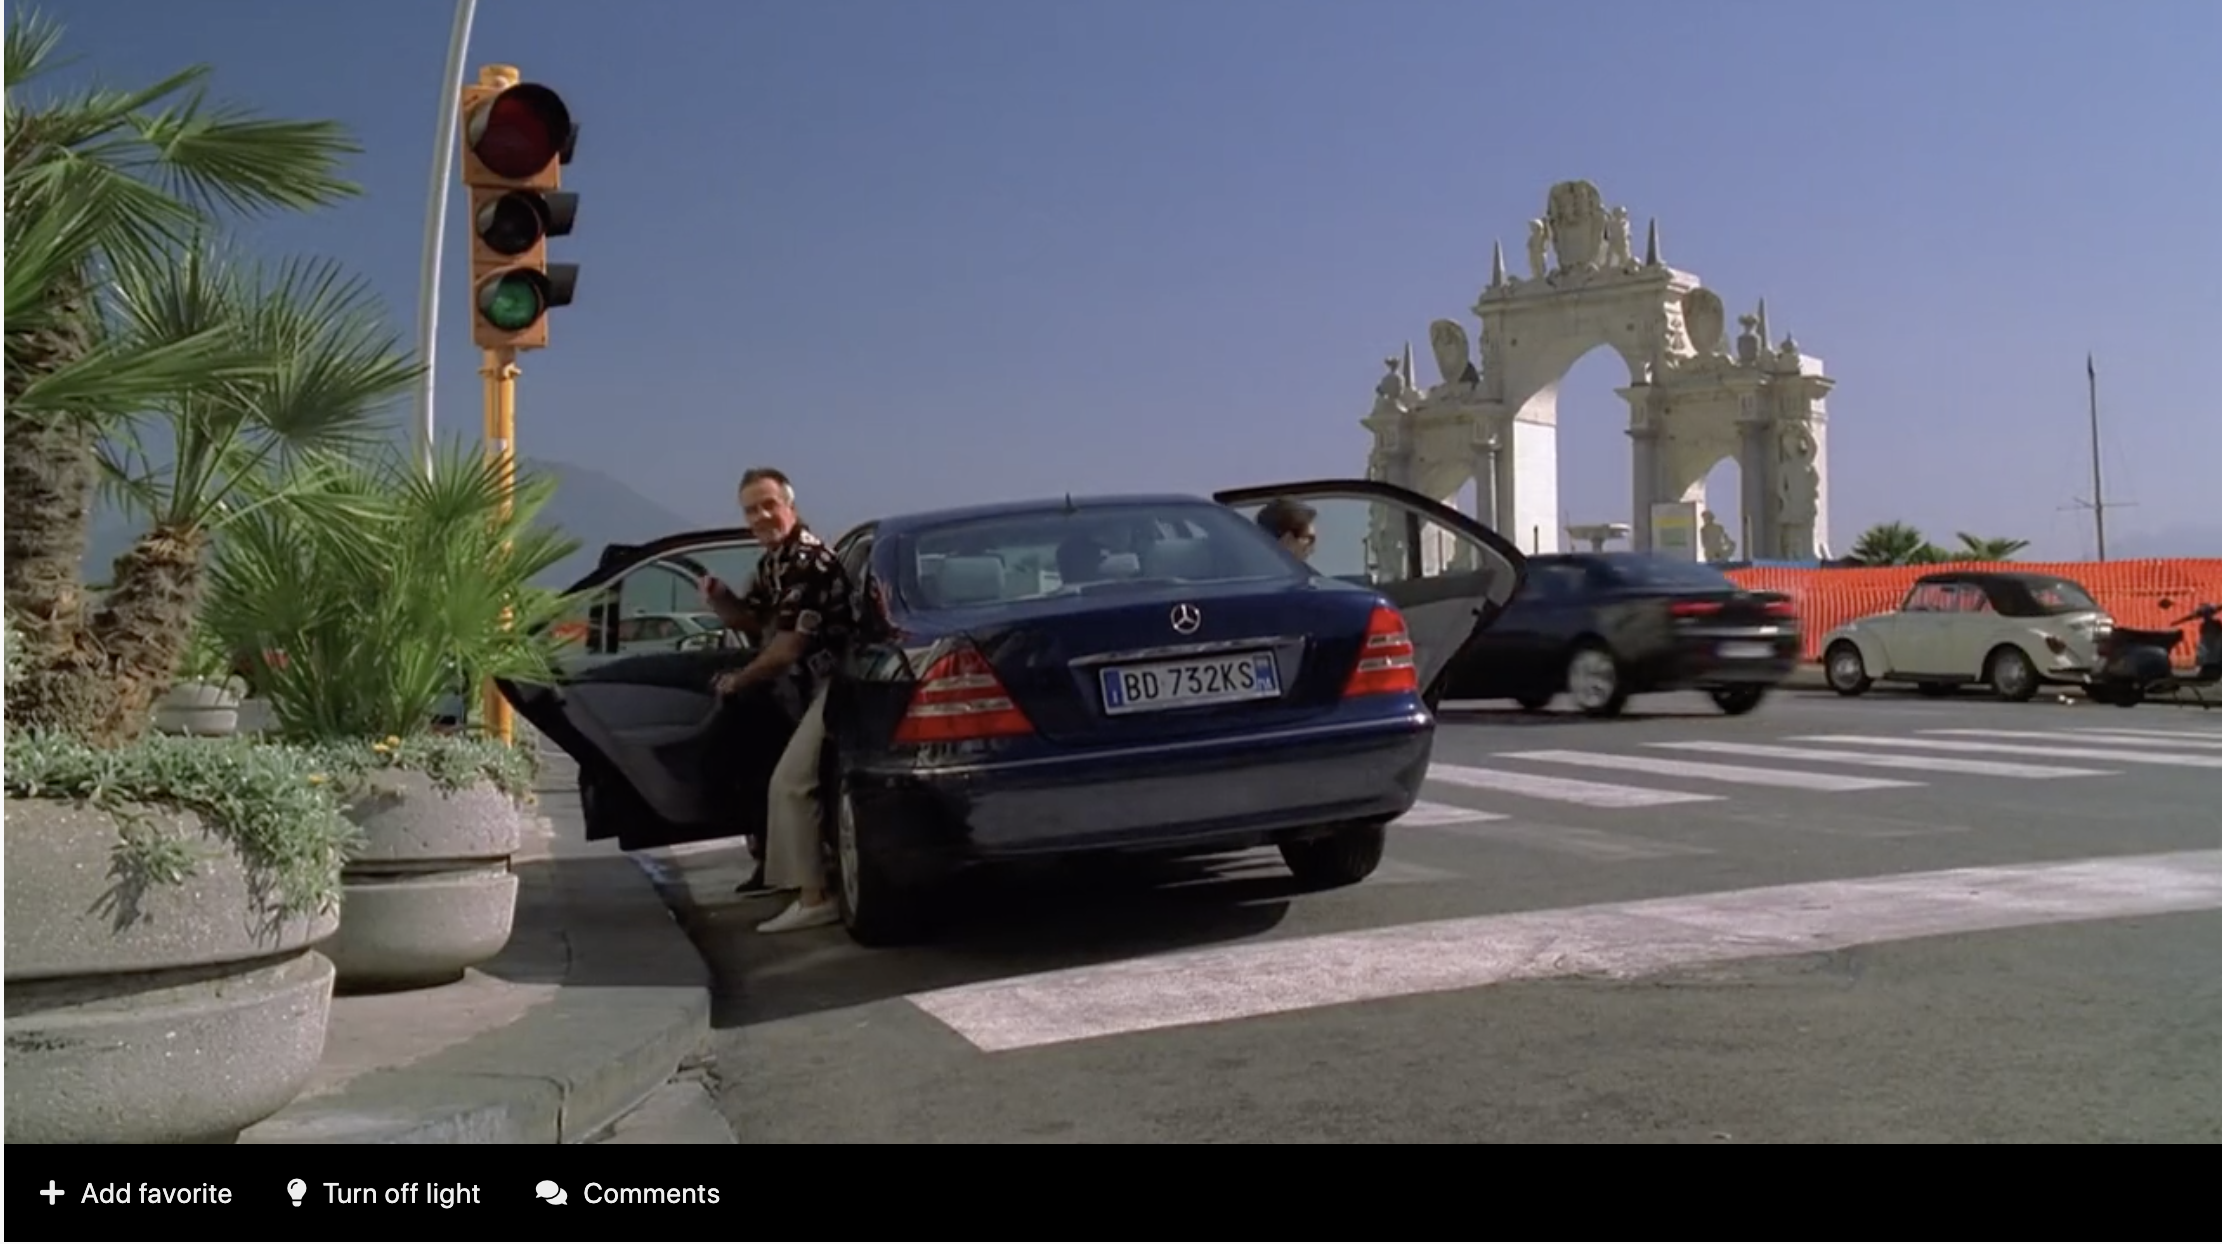 HBO/Entertainment image credit. Image of Paulie getting out the car in front of the fontana in Naples Italy